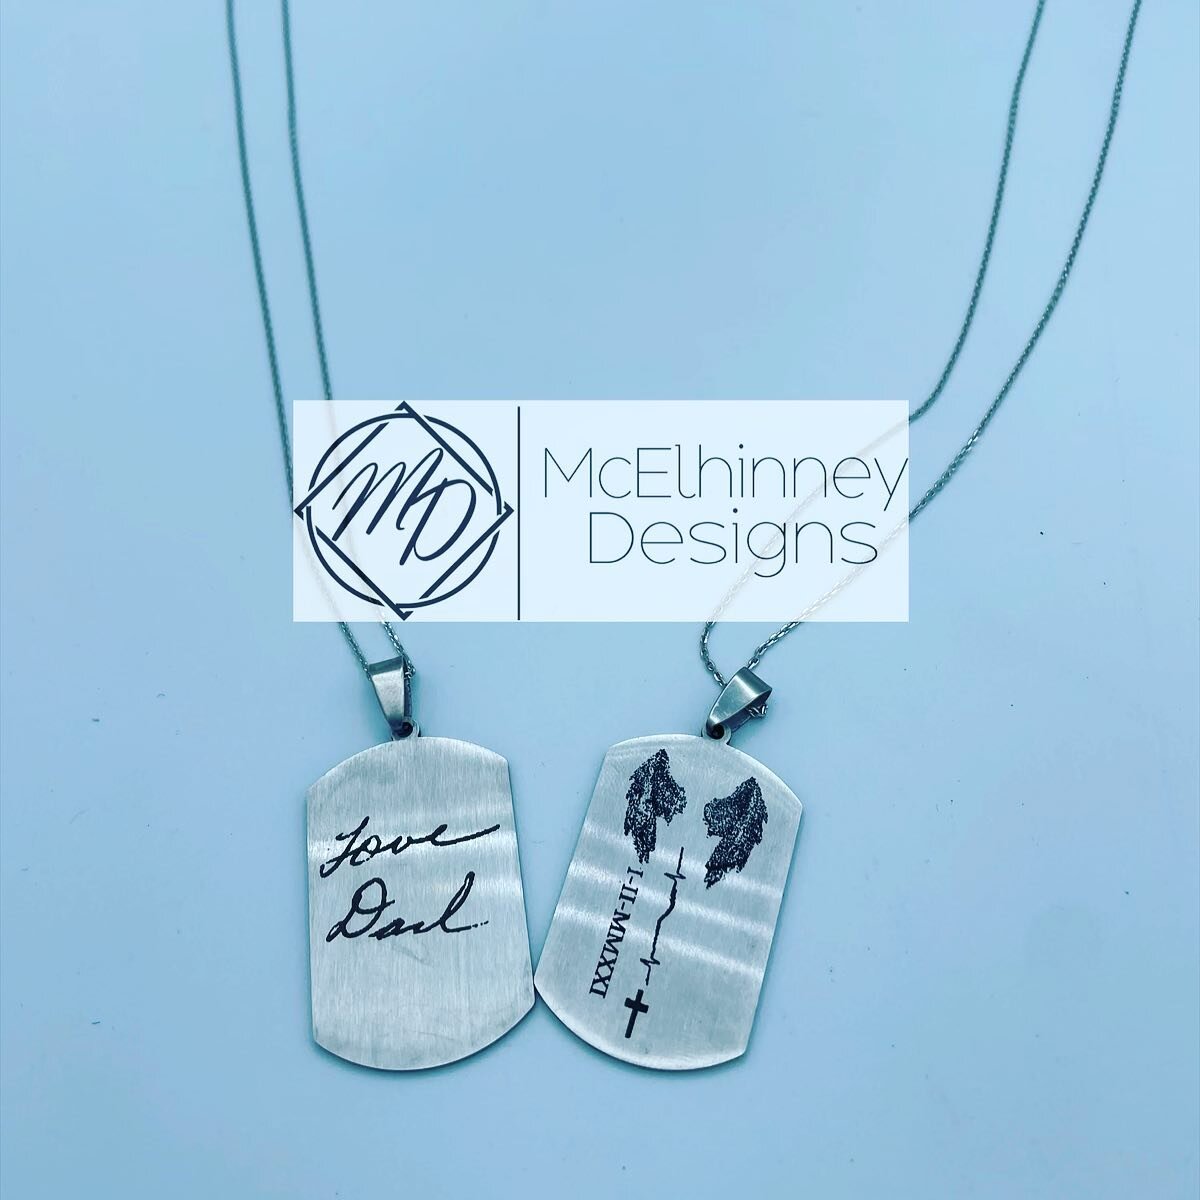 Memorial gift for two boys.  The wings were drawn by one of them. So talented. Honored to be able to make these for their memories. ⁣
.⁣
.⁣
.⁣
.⁣
.⁣
#memorialjewelrythatdoesntsuck #memorialjewelryartist #memorialjewelryforwomen #memorialjewelrycanada